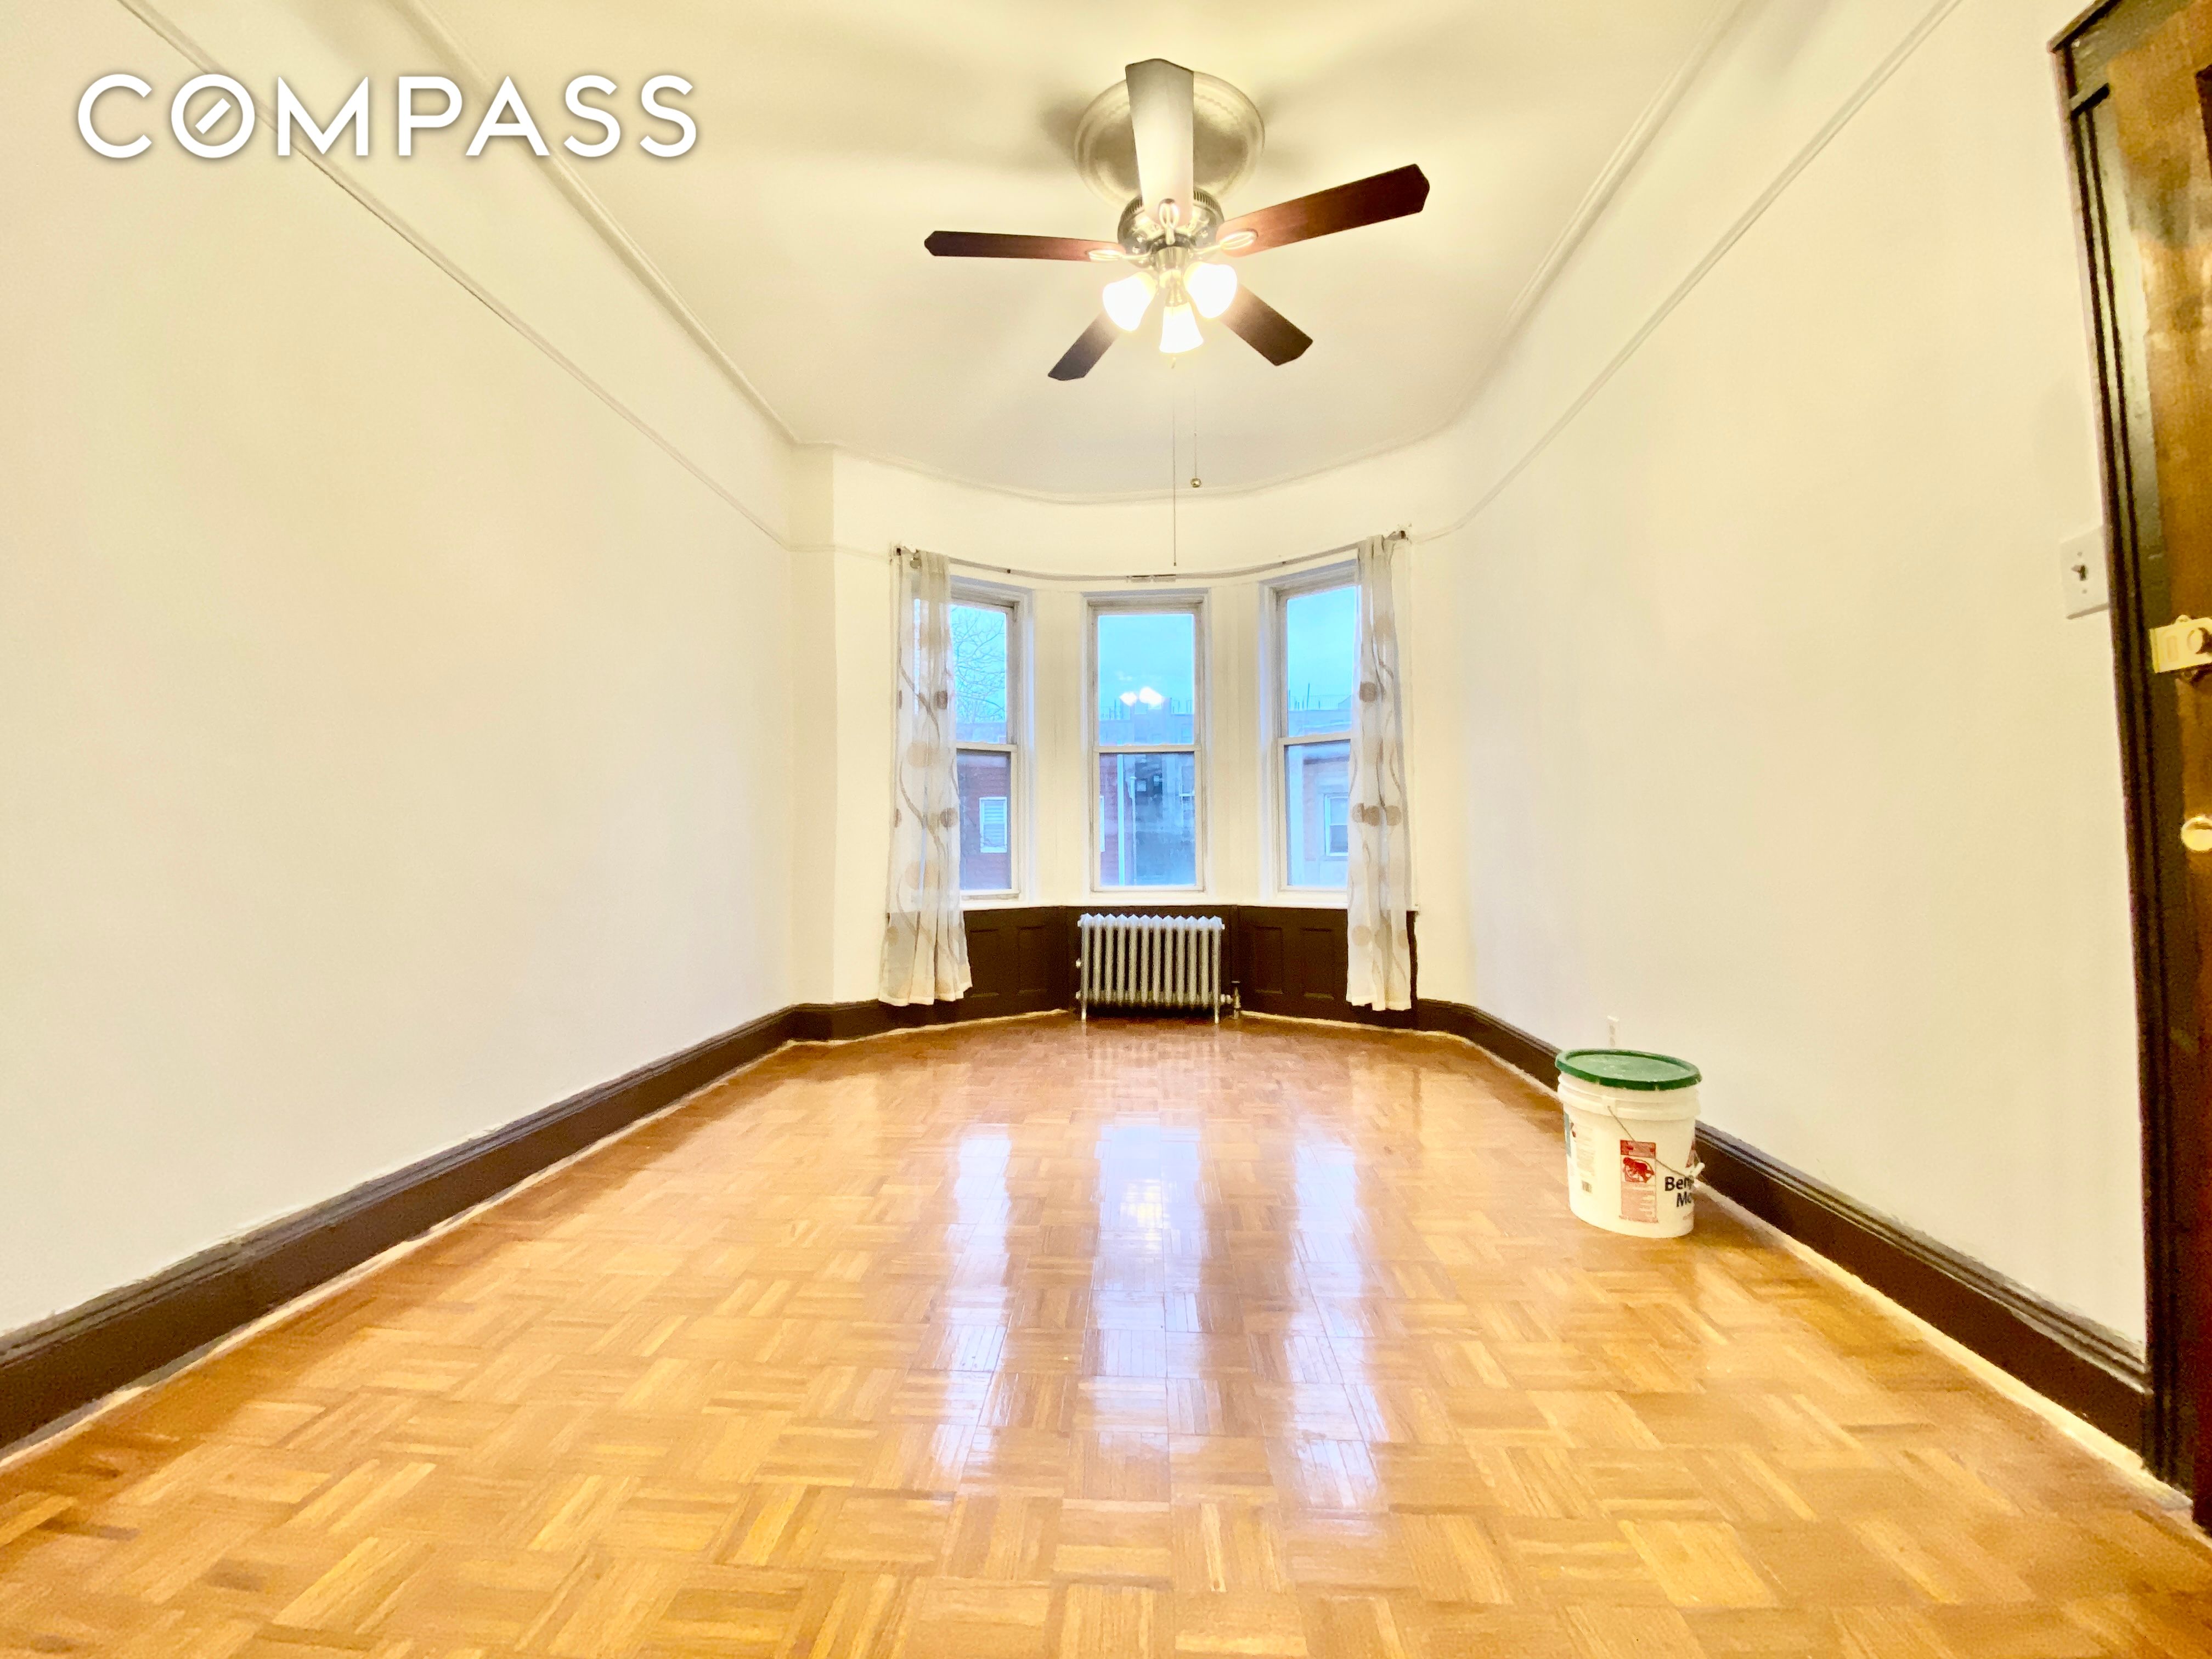 25 Pleasant Place 2, Bedford-Stuyvesant, Downtown, NYC - 3 Bedrooms  

5 Rooms - 